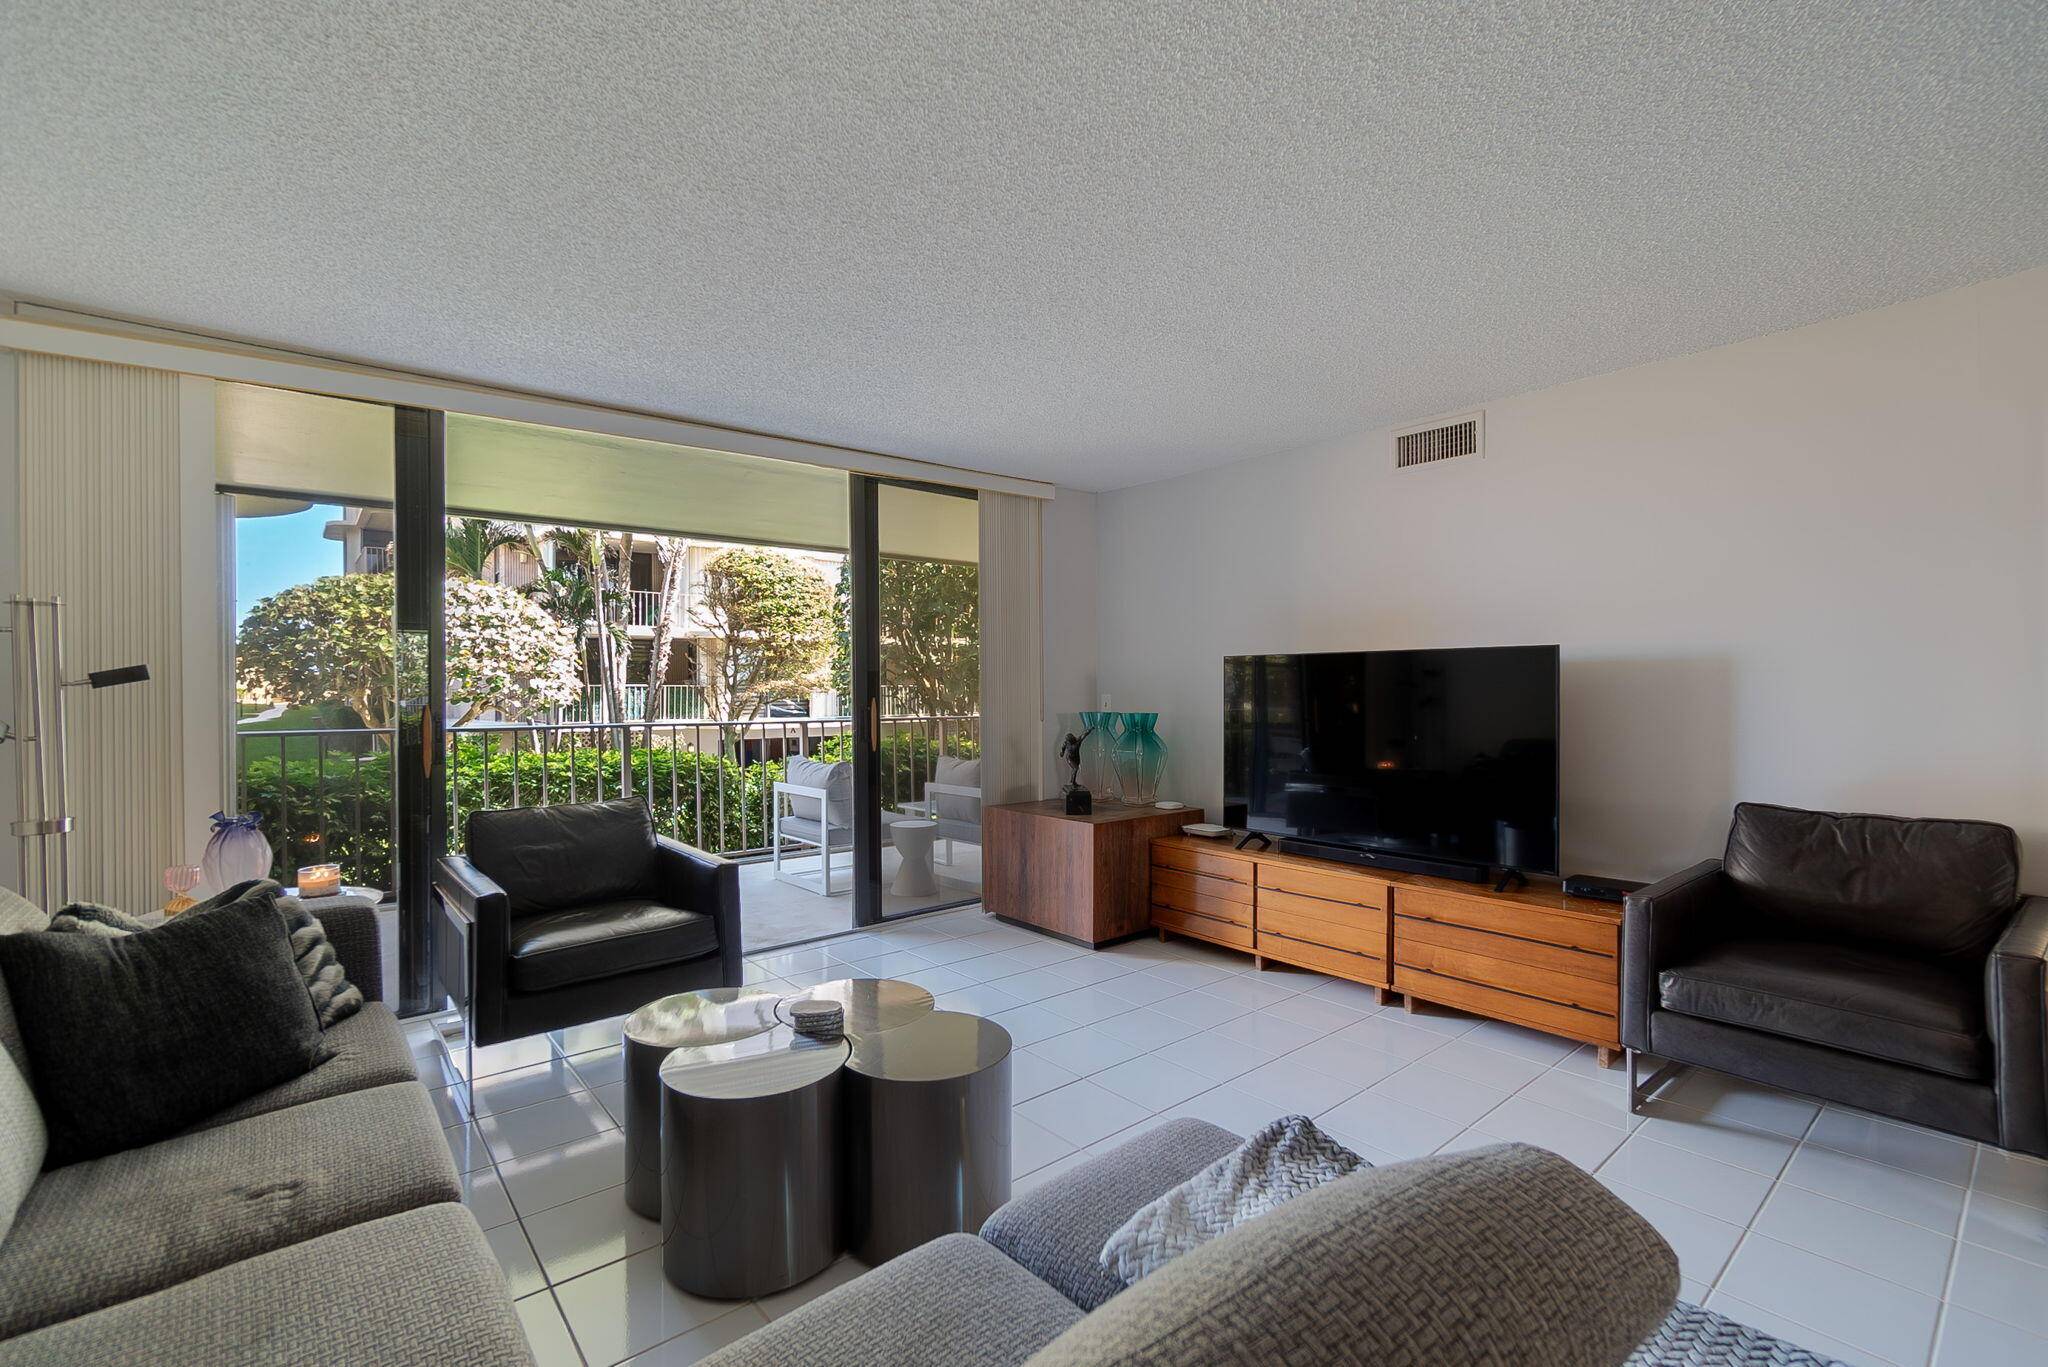 Enjoy casual Palm Beach living at the 3200 Building oceanfront complex.